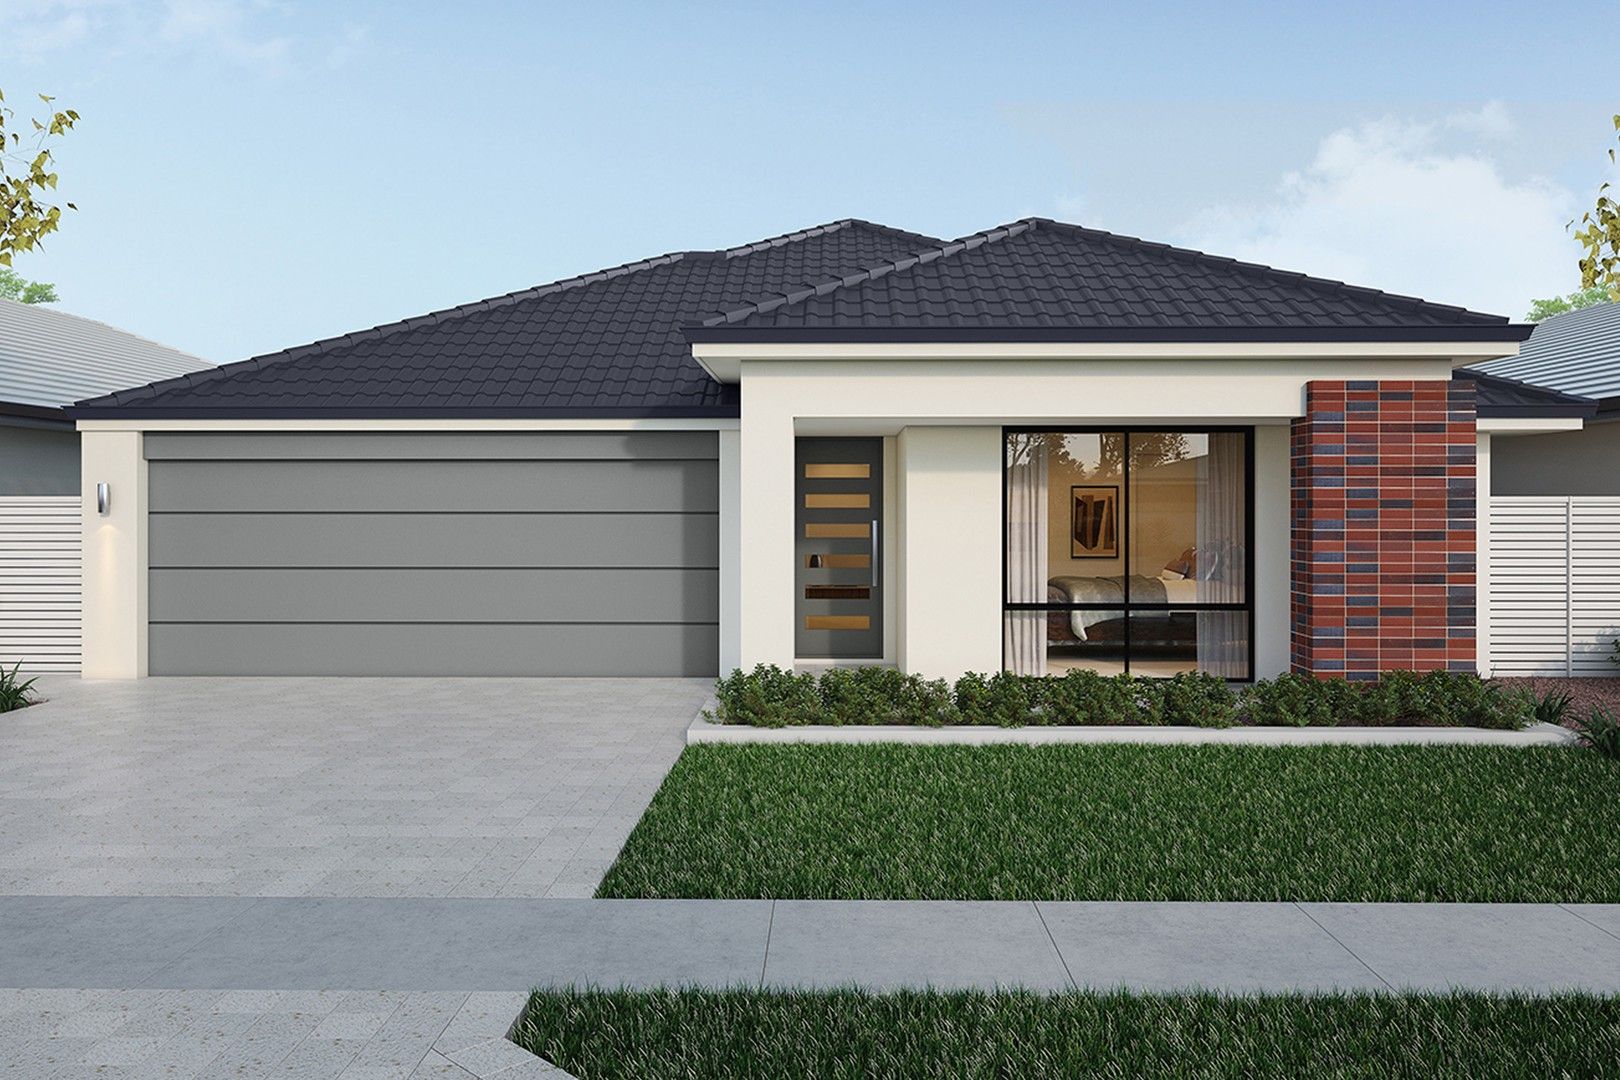 3 bedrooms New House & Land in Lot 272 Forest Walk MANDURAH WA, 6210